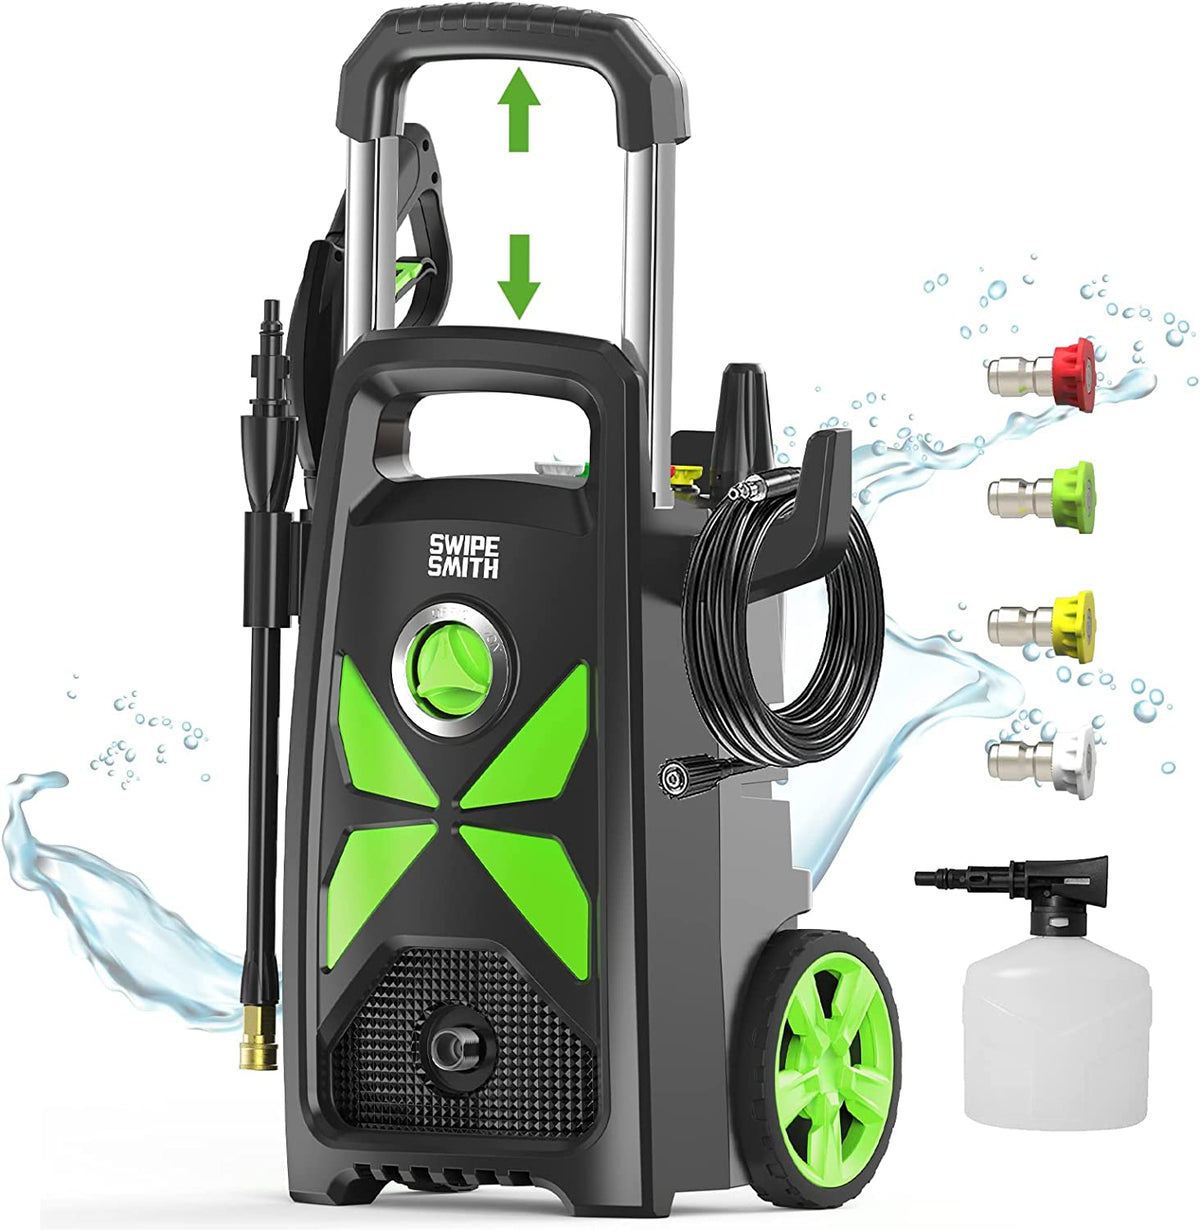 SWIPESMITH Electric Pressure Washer, 2500 Max PSI 2.4 GPM Power Washer with Telescopic Handle WM